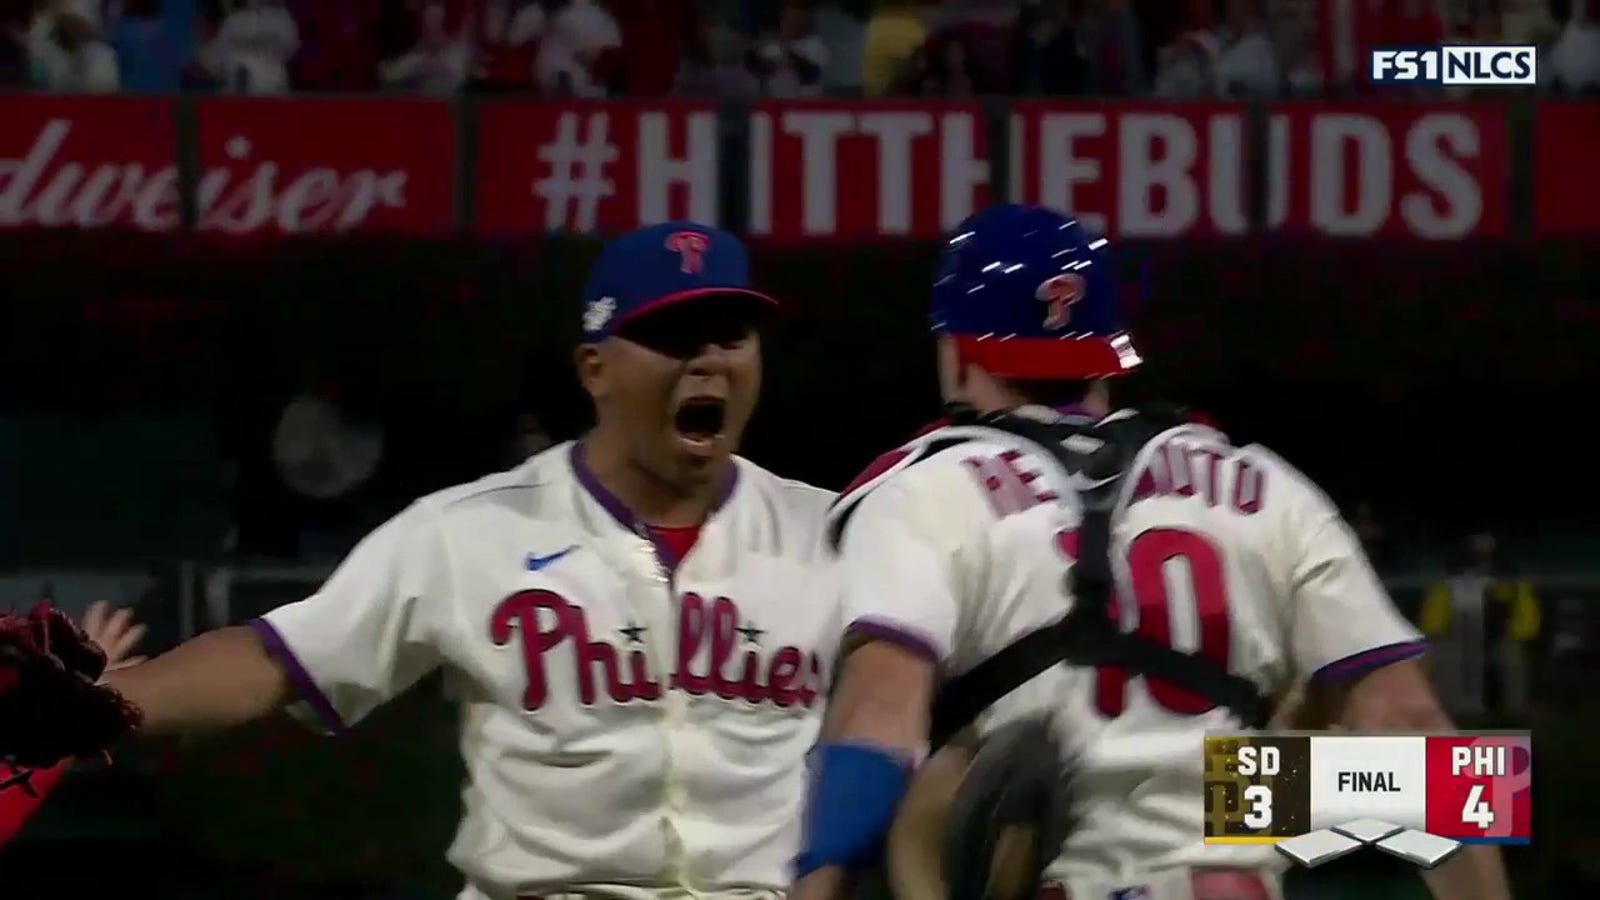 Phillies advance to World Series by defeating Padres 4-3 in Game 5